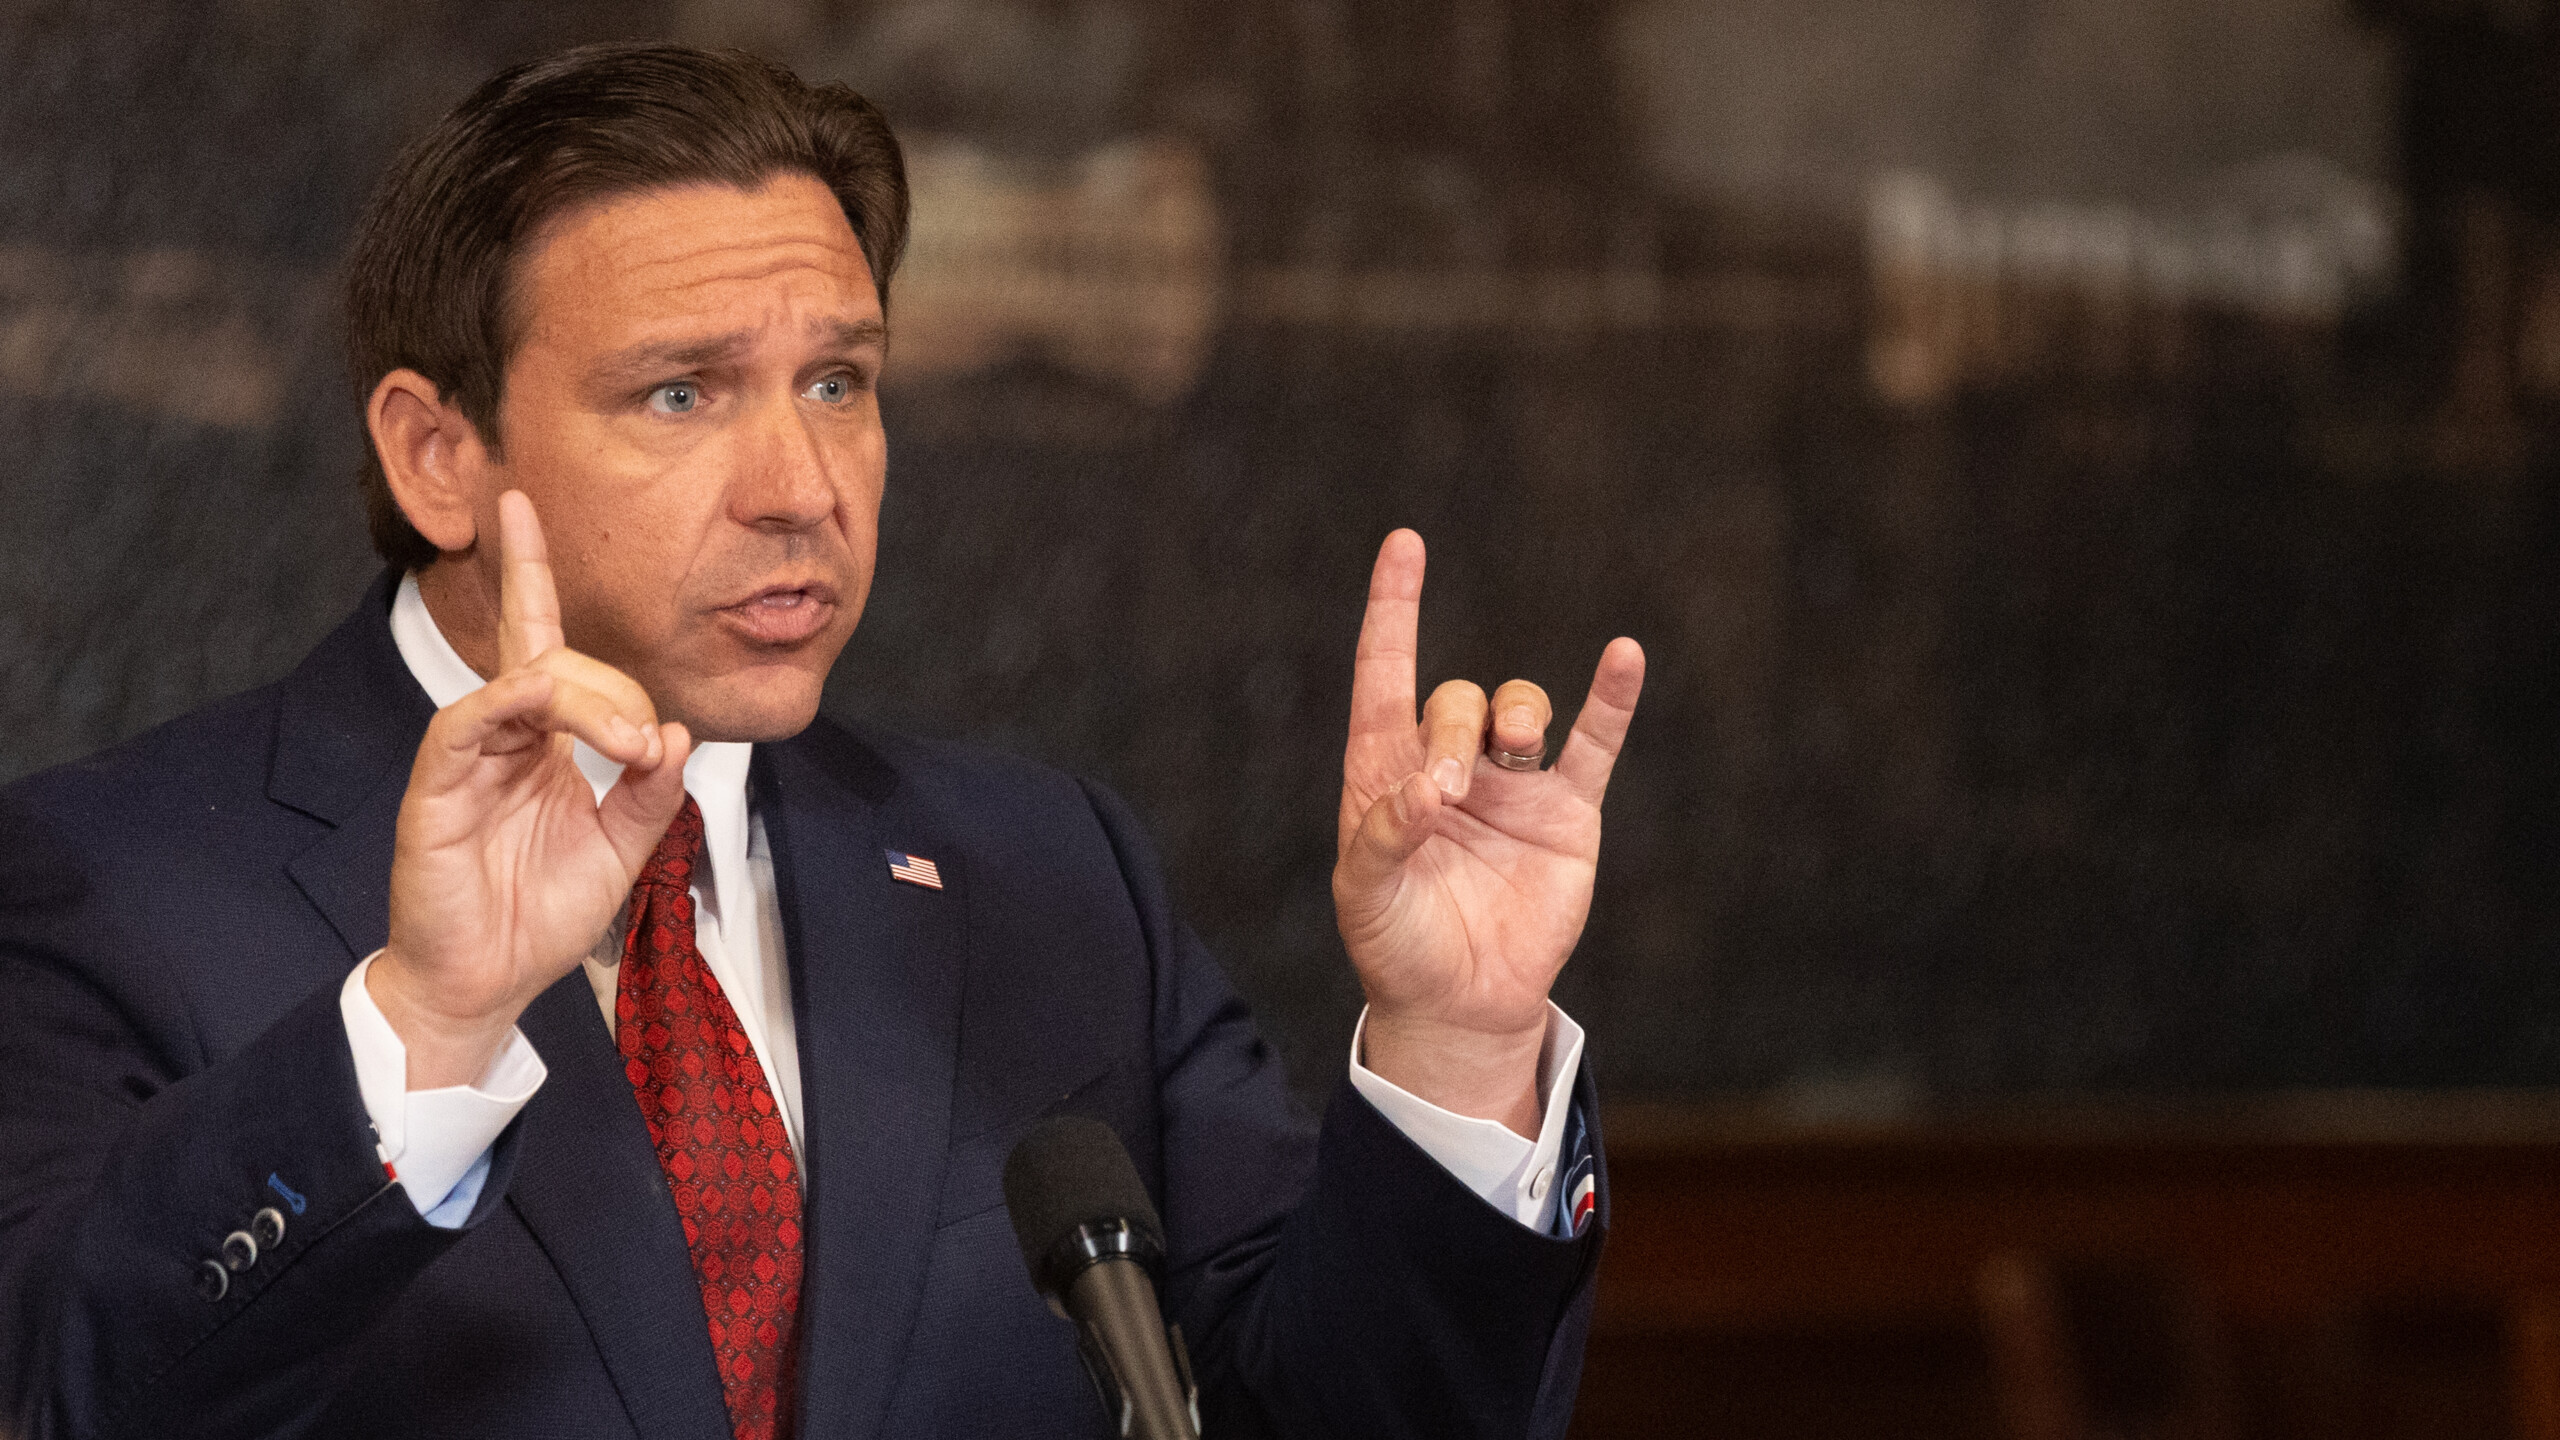 Gov. Ron DeSantis has over 40 ethics violations to sign off on, according to a report from the Florida Commission on Ethics. The oldest case dates back over seven years.